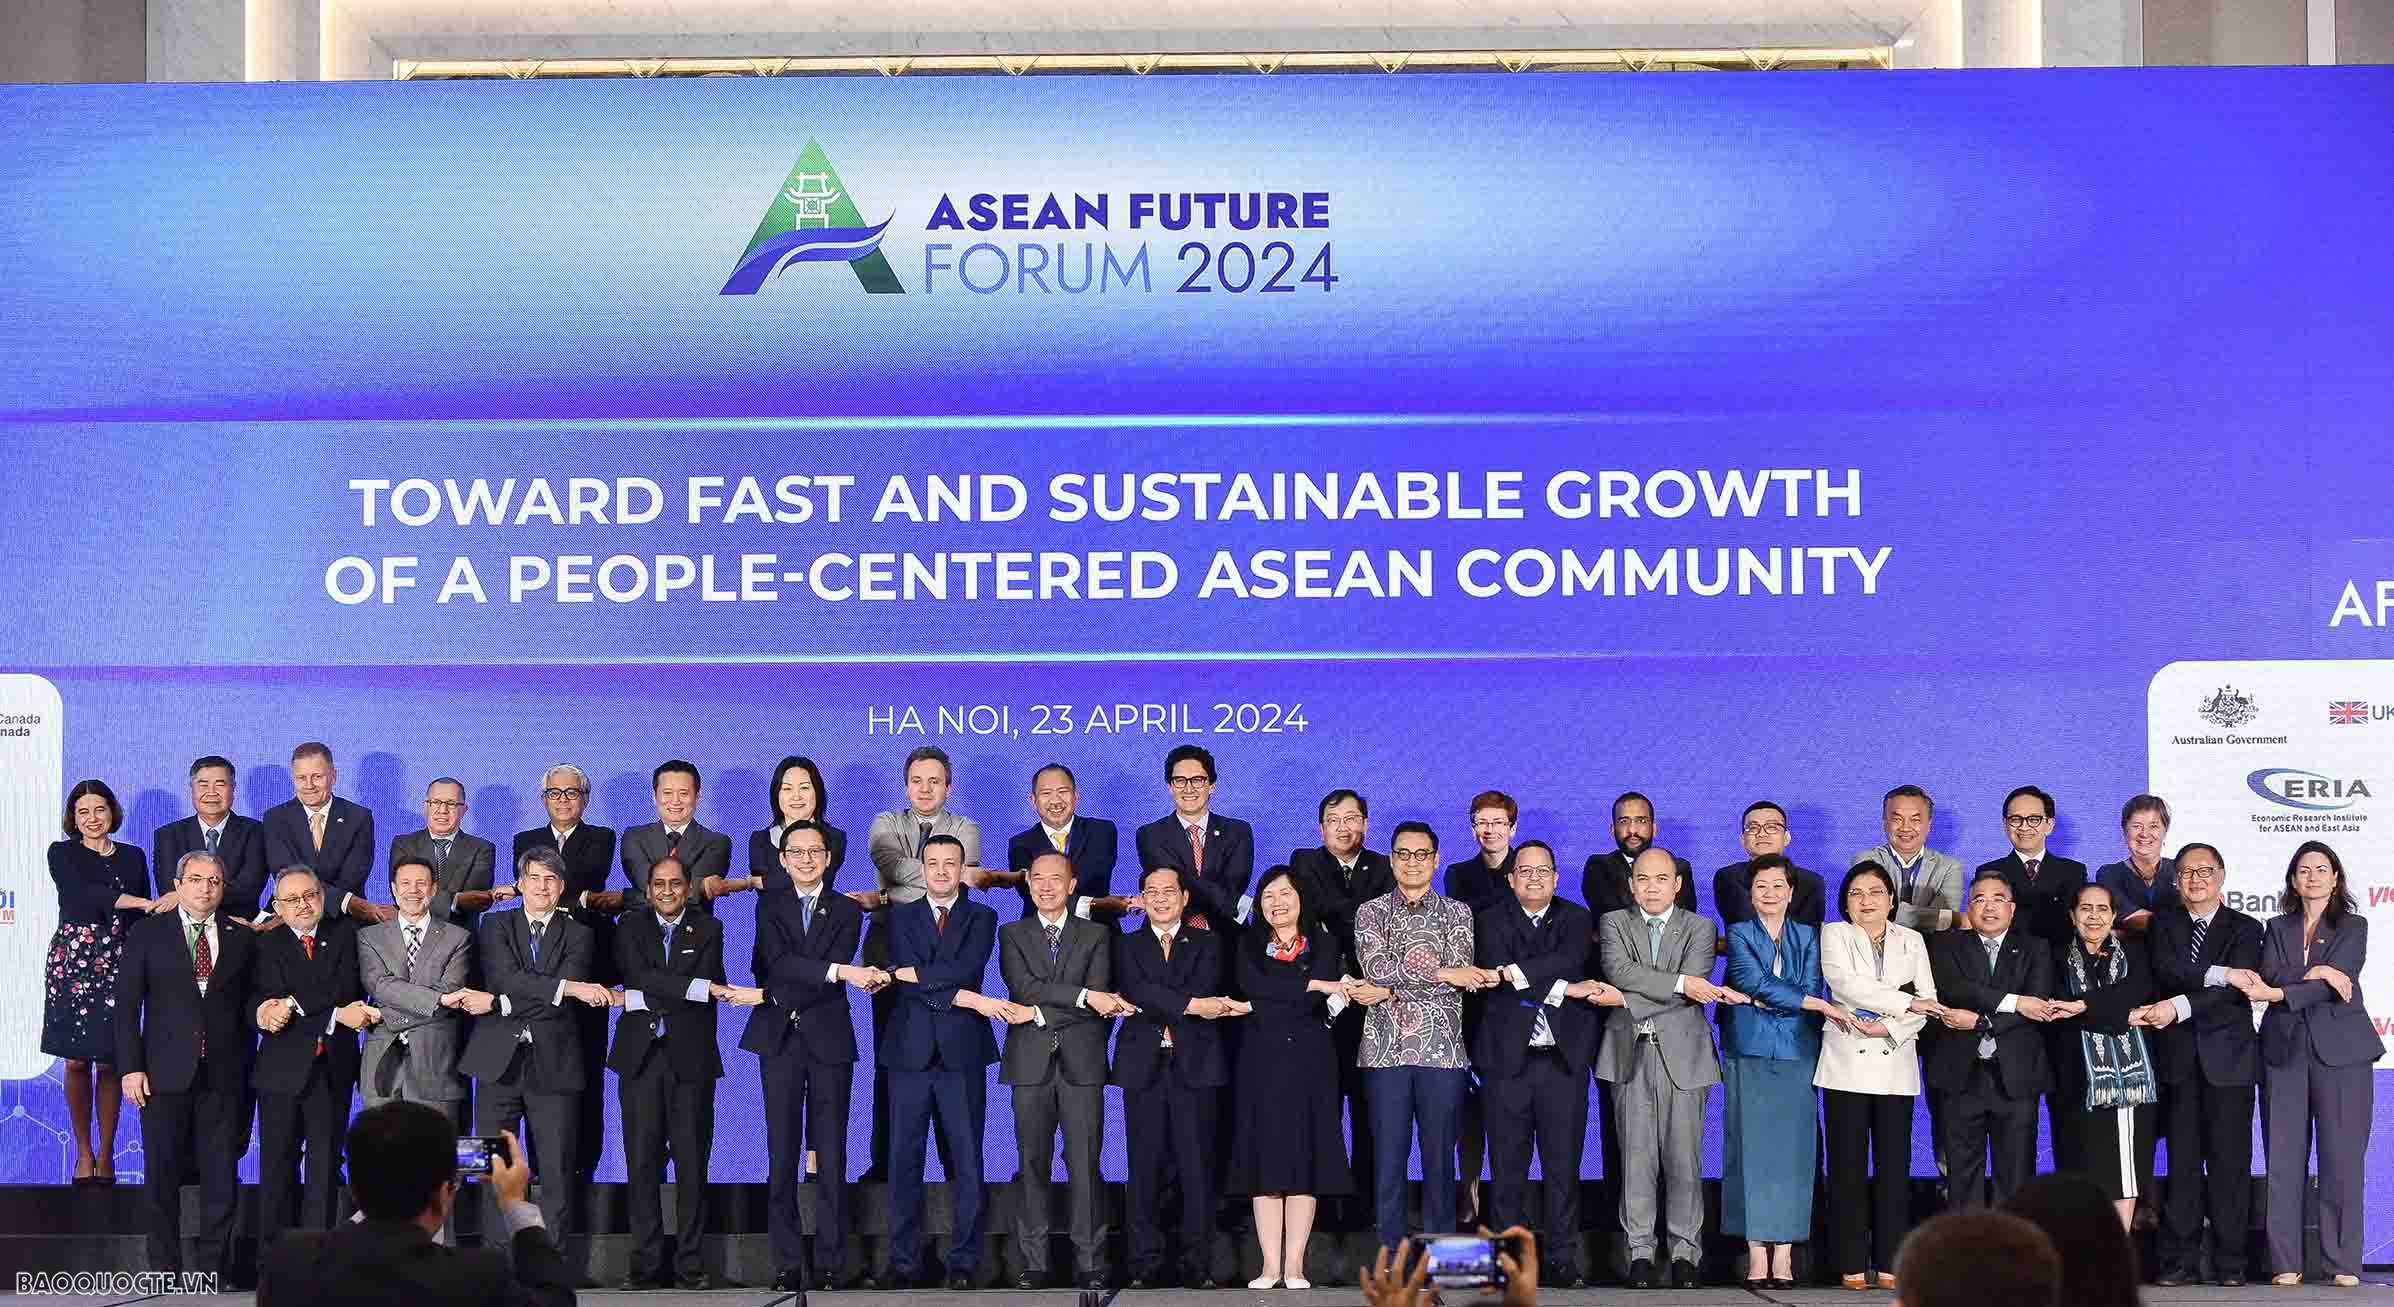 ASEAN Future Forum 2024: Wrapped up after a day of productive discussions